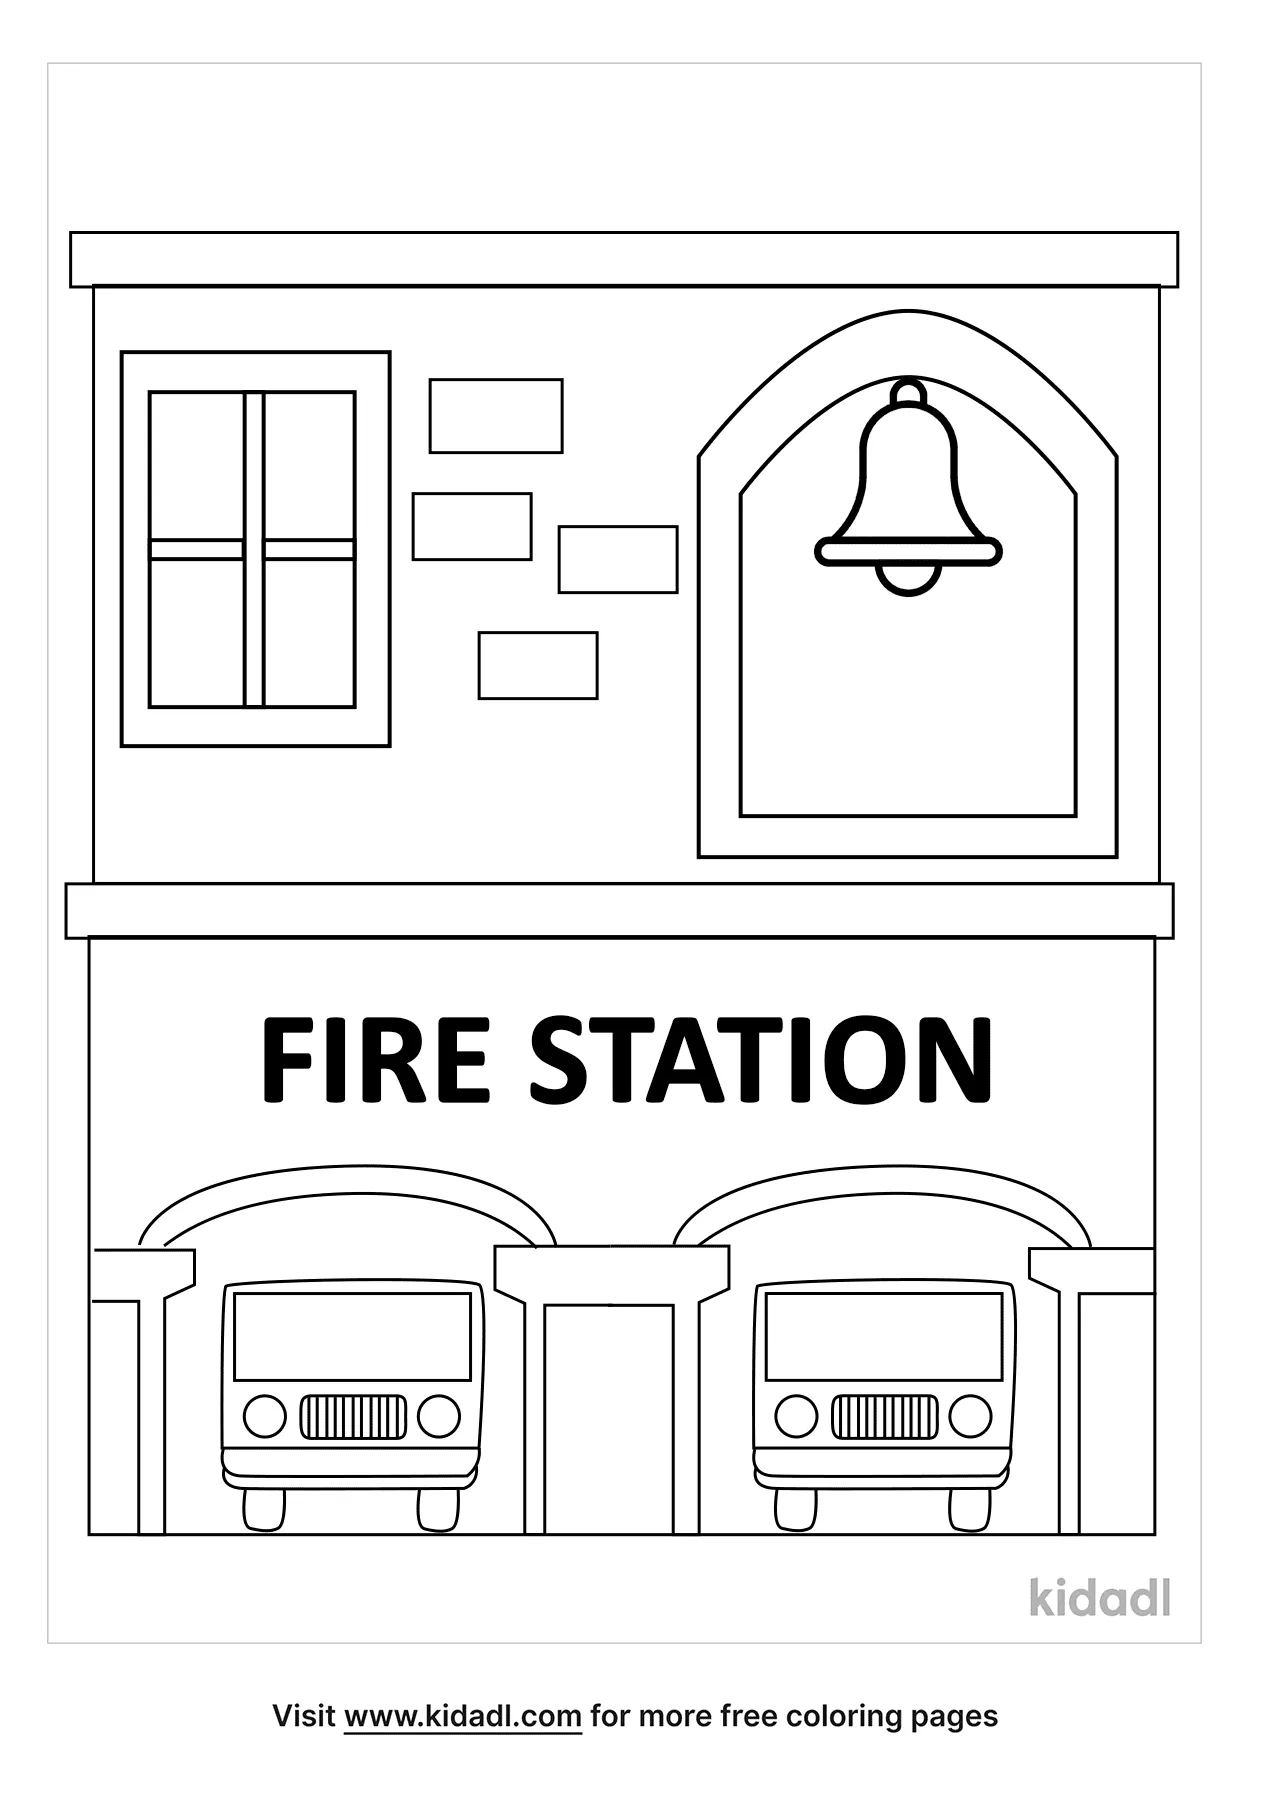 Fire Station Coloring Pages Free Buildings Coloring Pages Kidadl